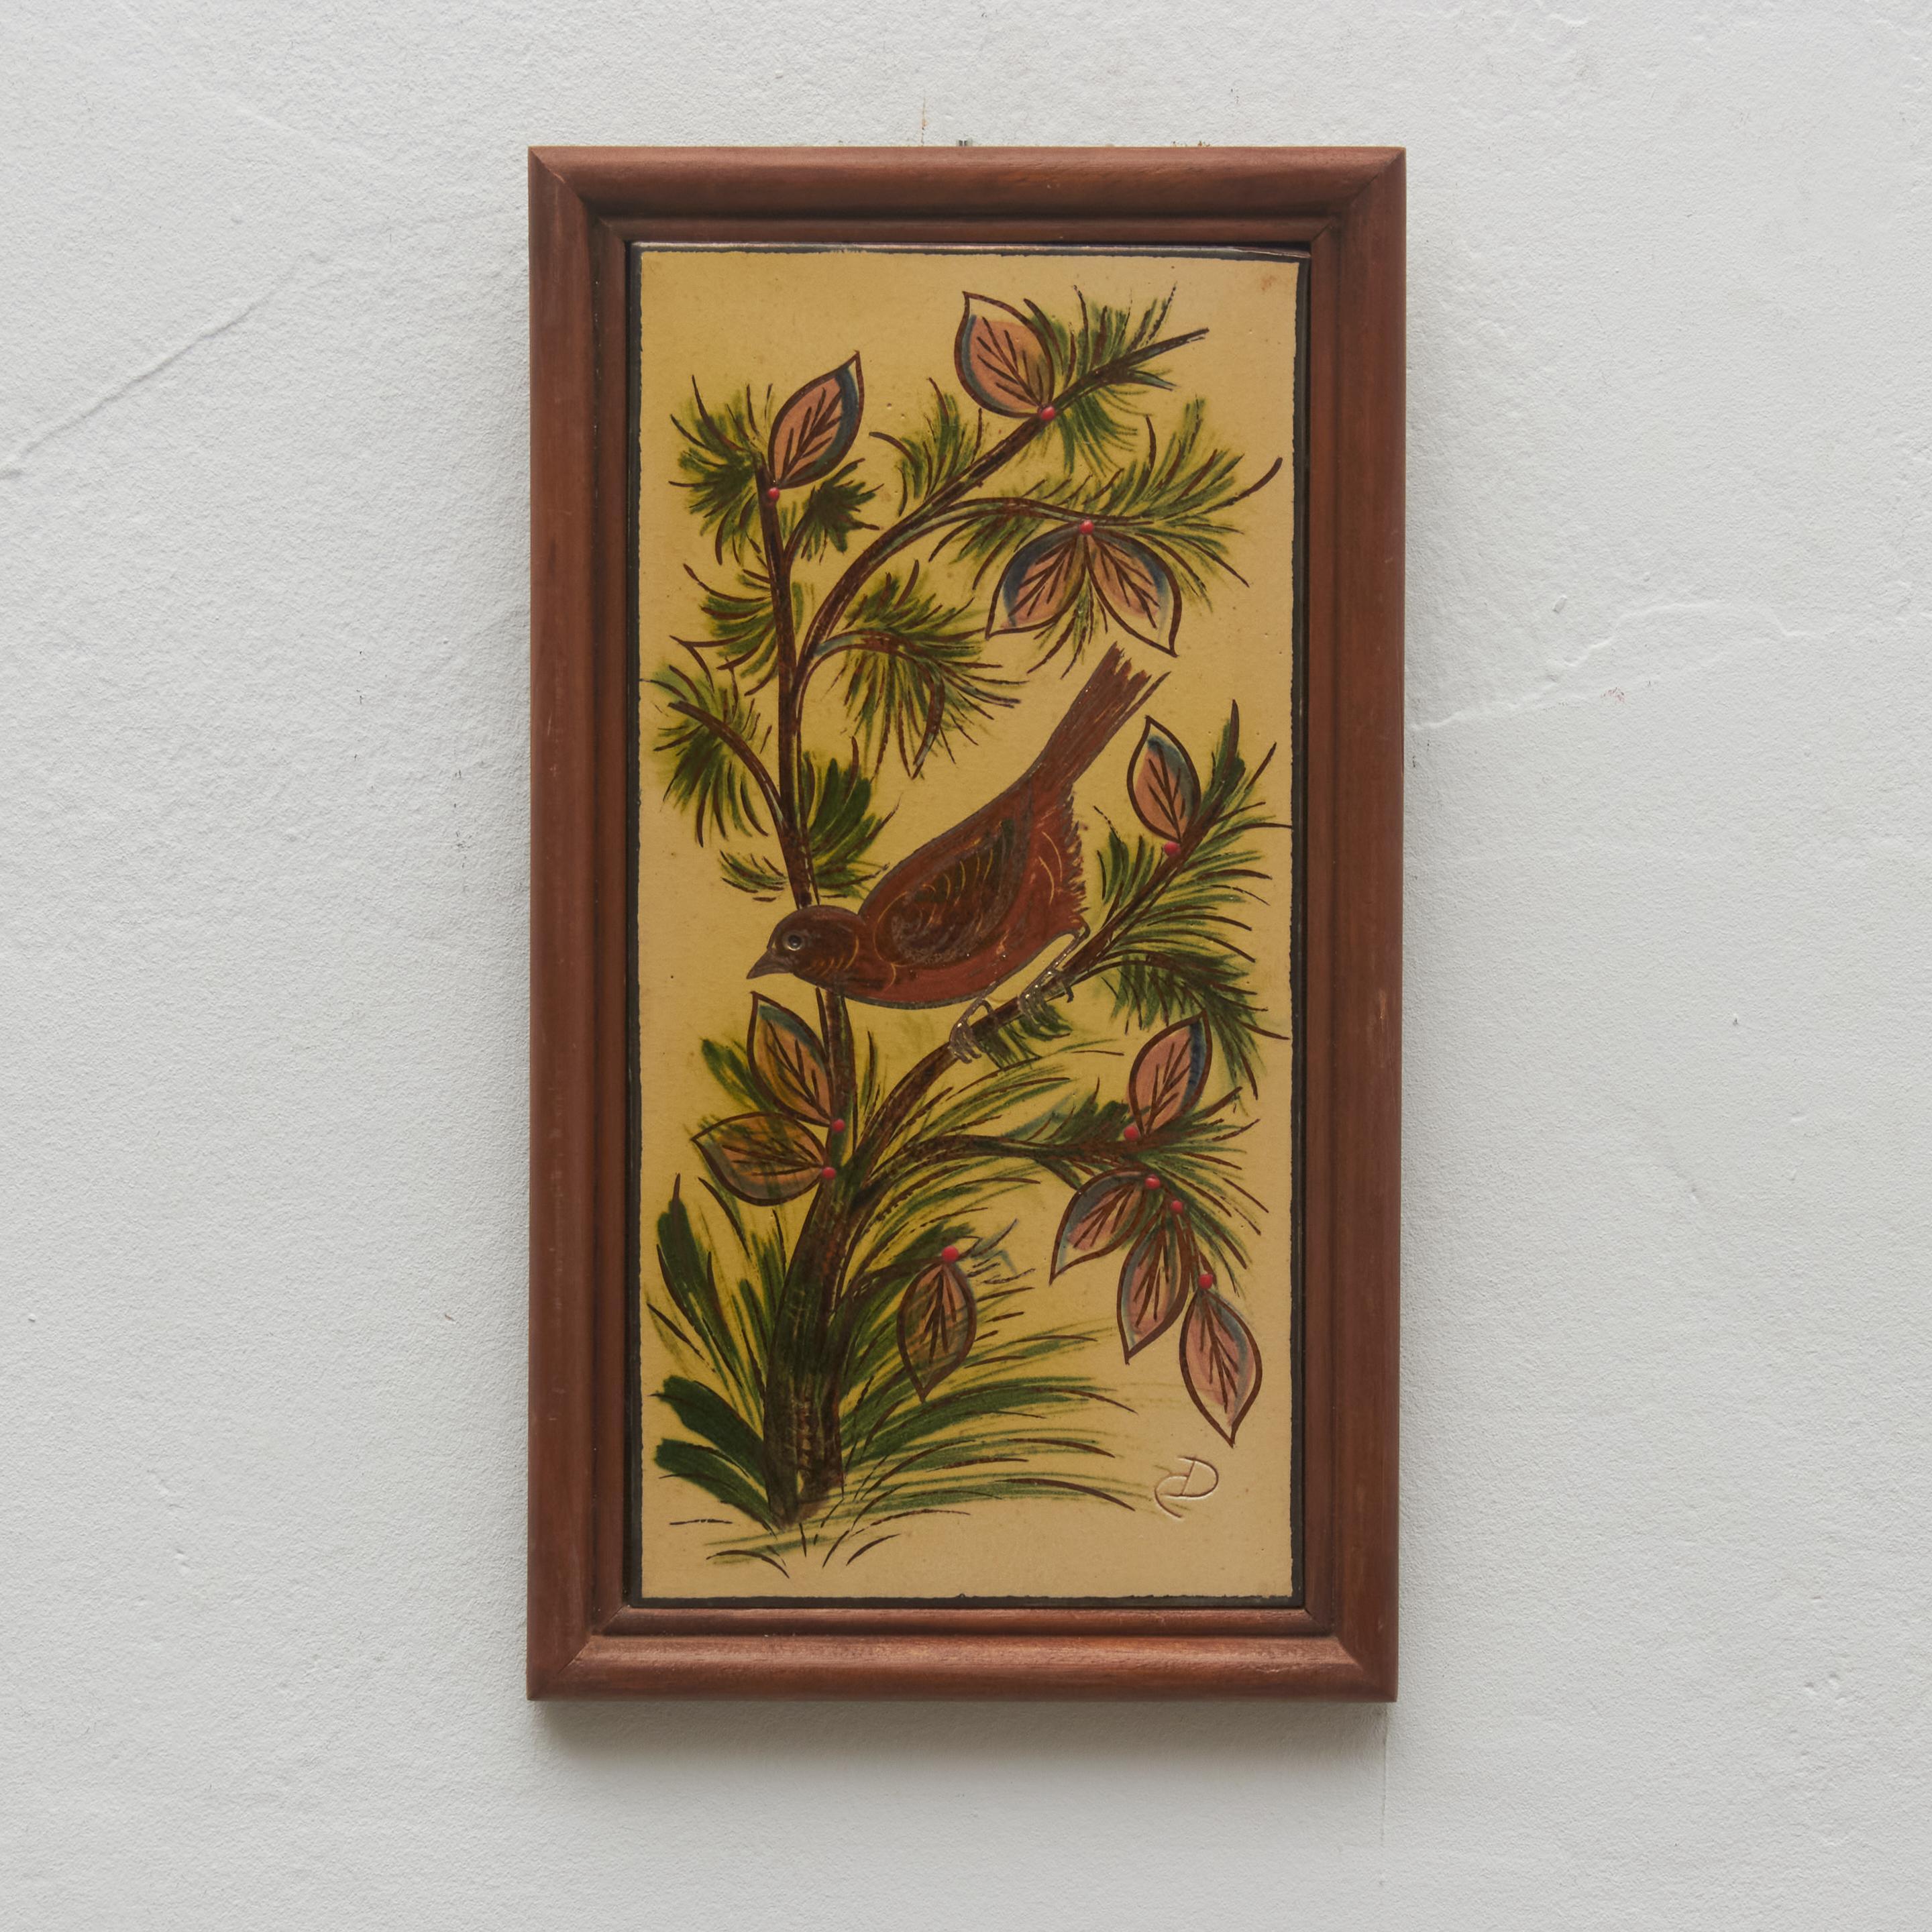 Ceramic hand painted artwork of a bird, designed by Catalan artist Diaz Costa, circa 1960.
Framed. Signed.

In original condition, with minor wear consistent of age and use, preserving a beautiul patina.

Important information regarding color(s) of